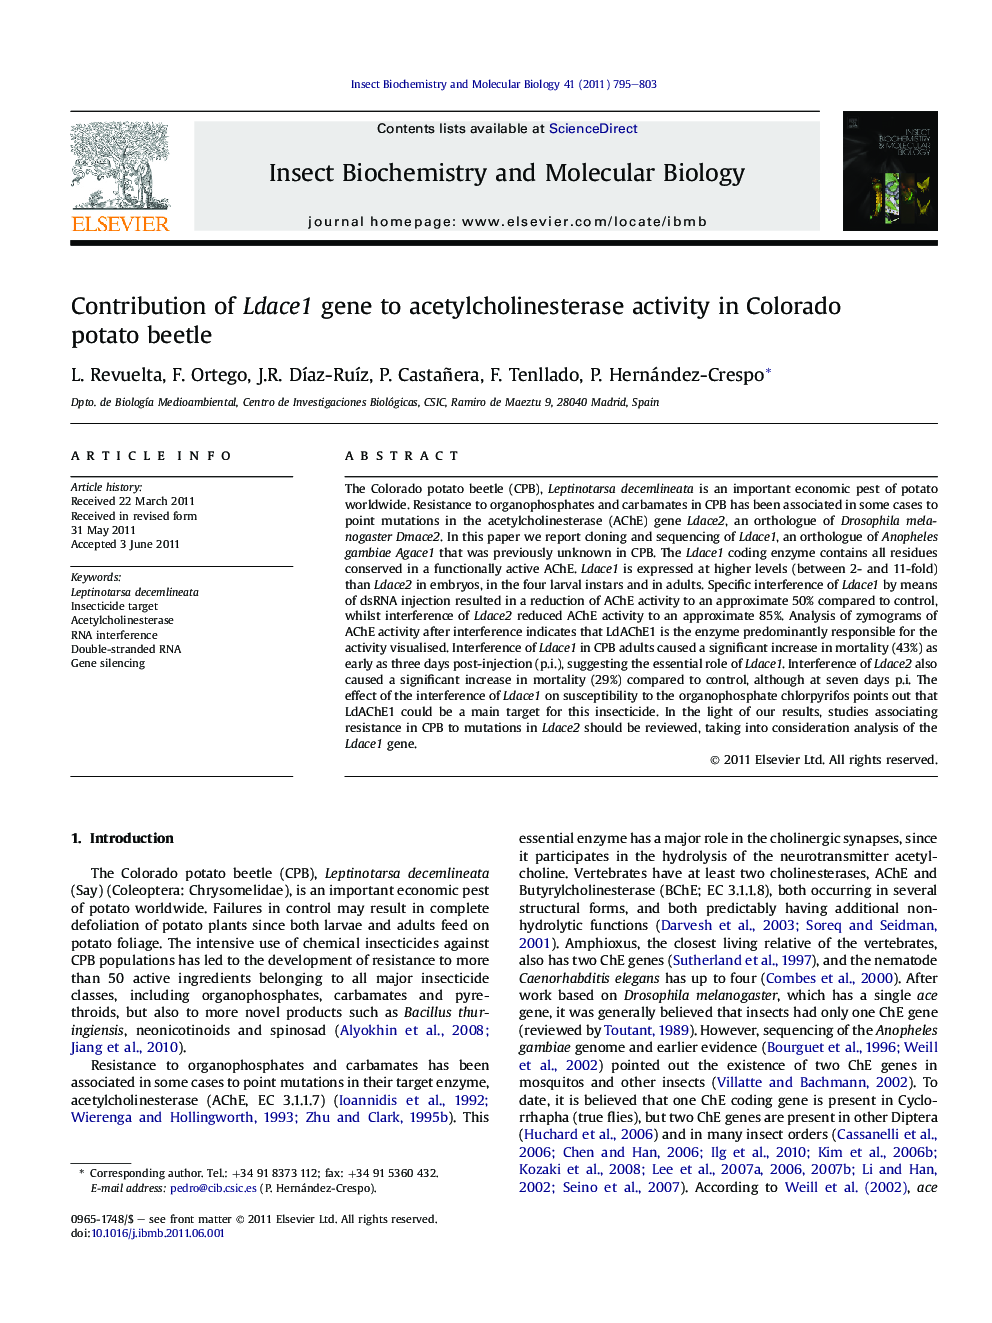 Contribution of Ldace1 gene to acetylcholinesterase activity in Colorado potato beetle